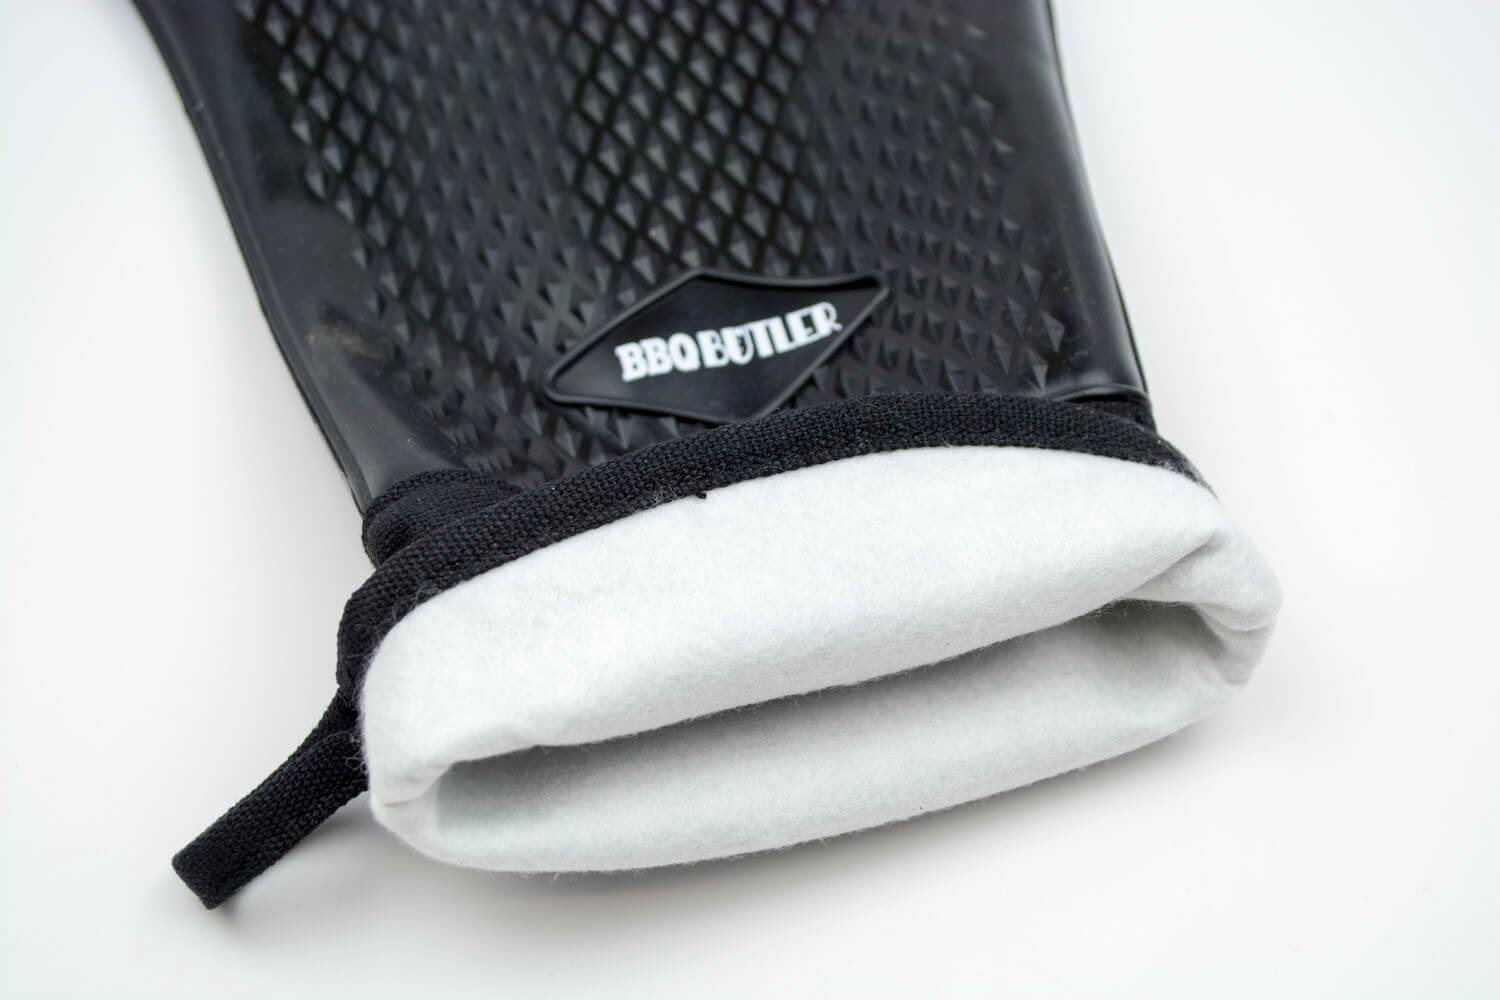 BBQ Butler Cloth Lined Silicone Gloves